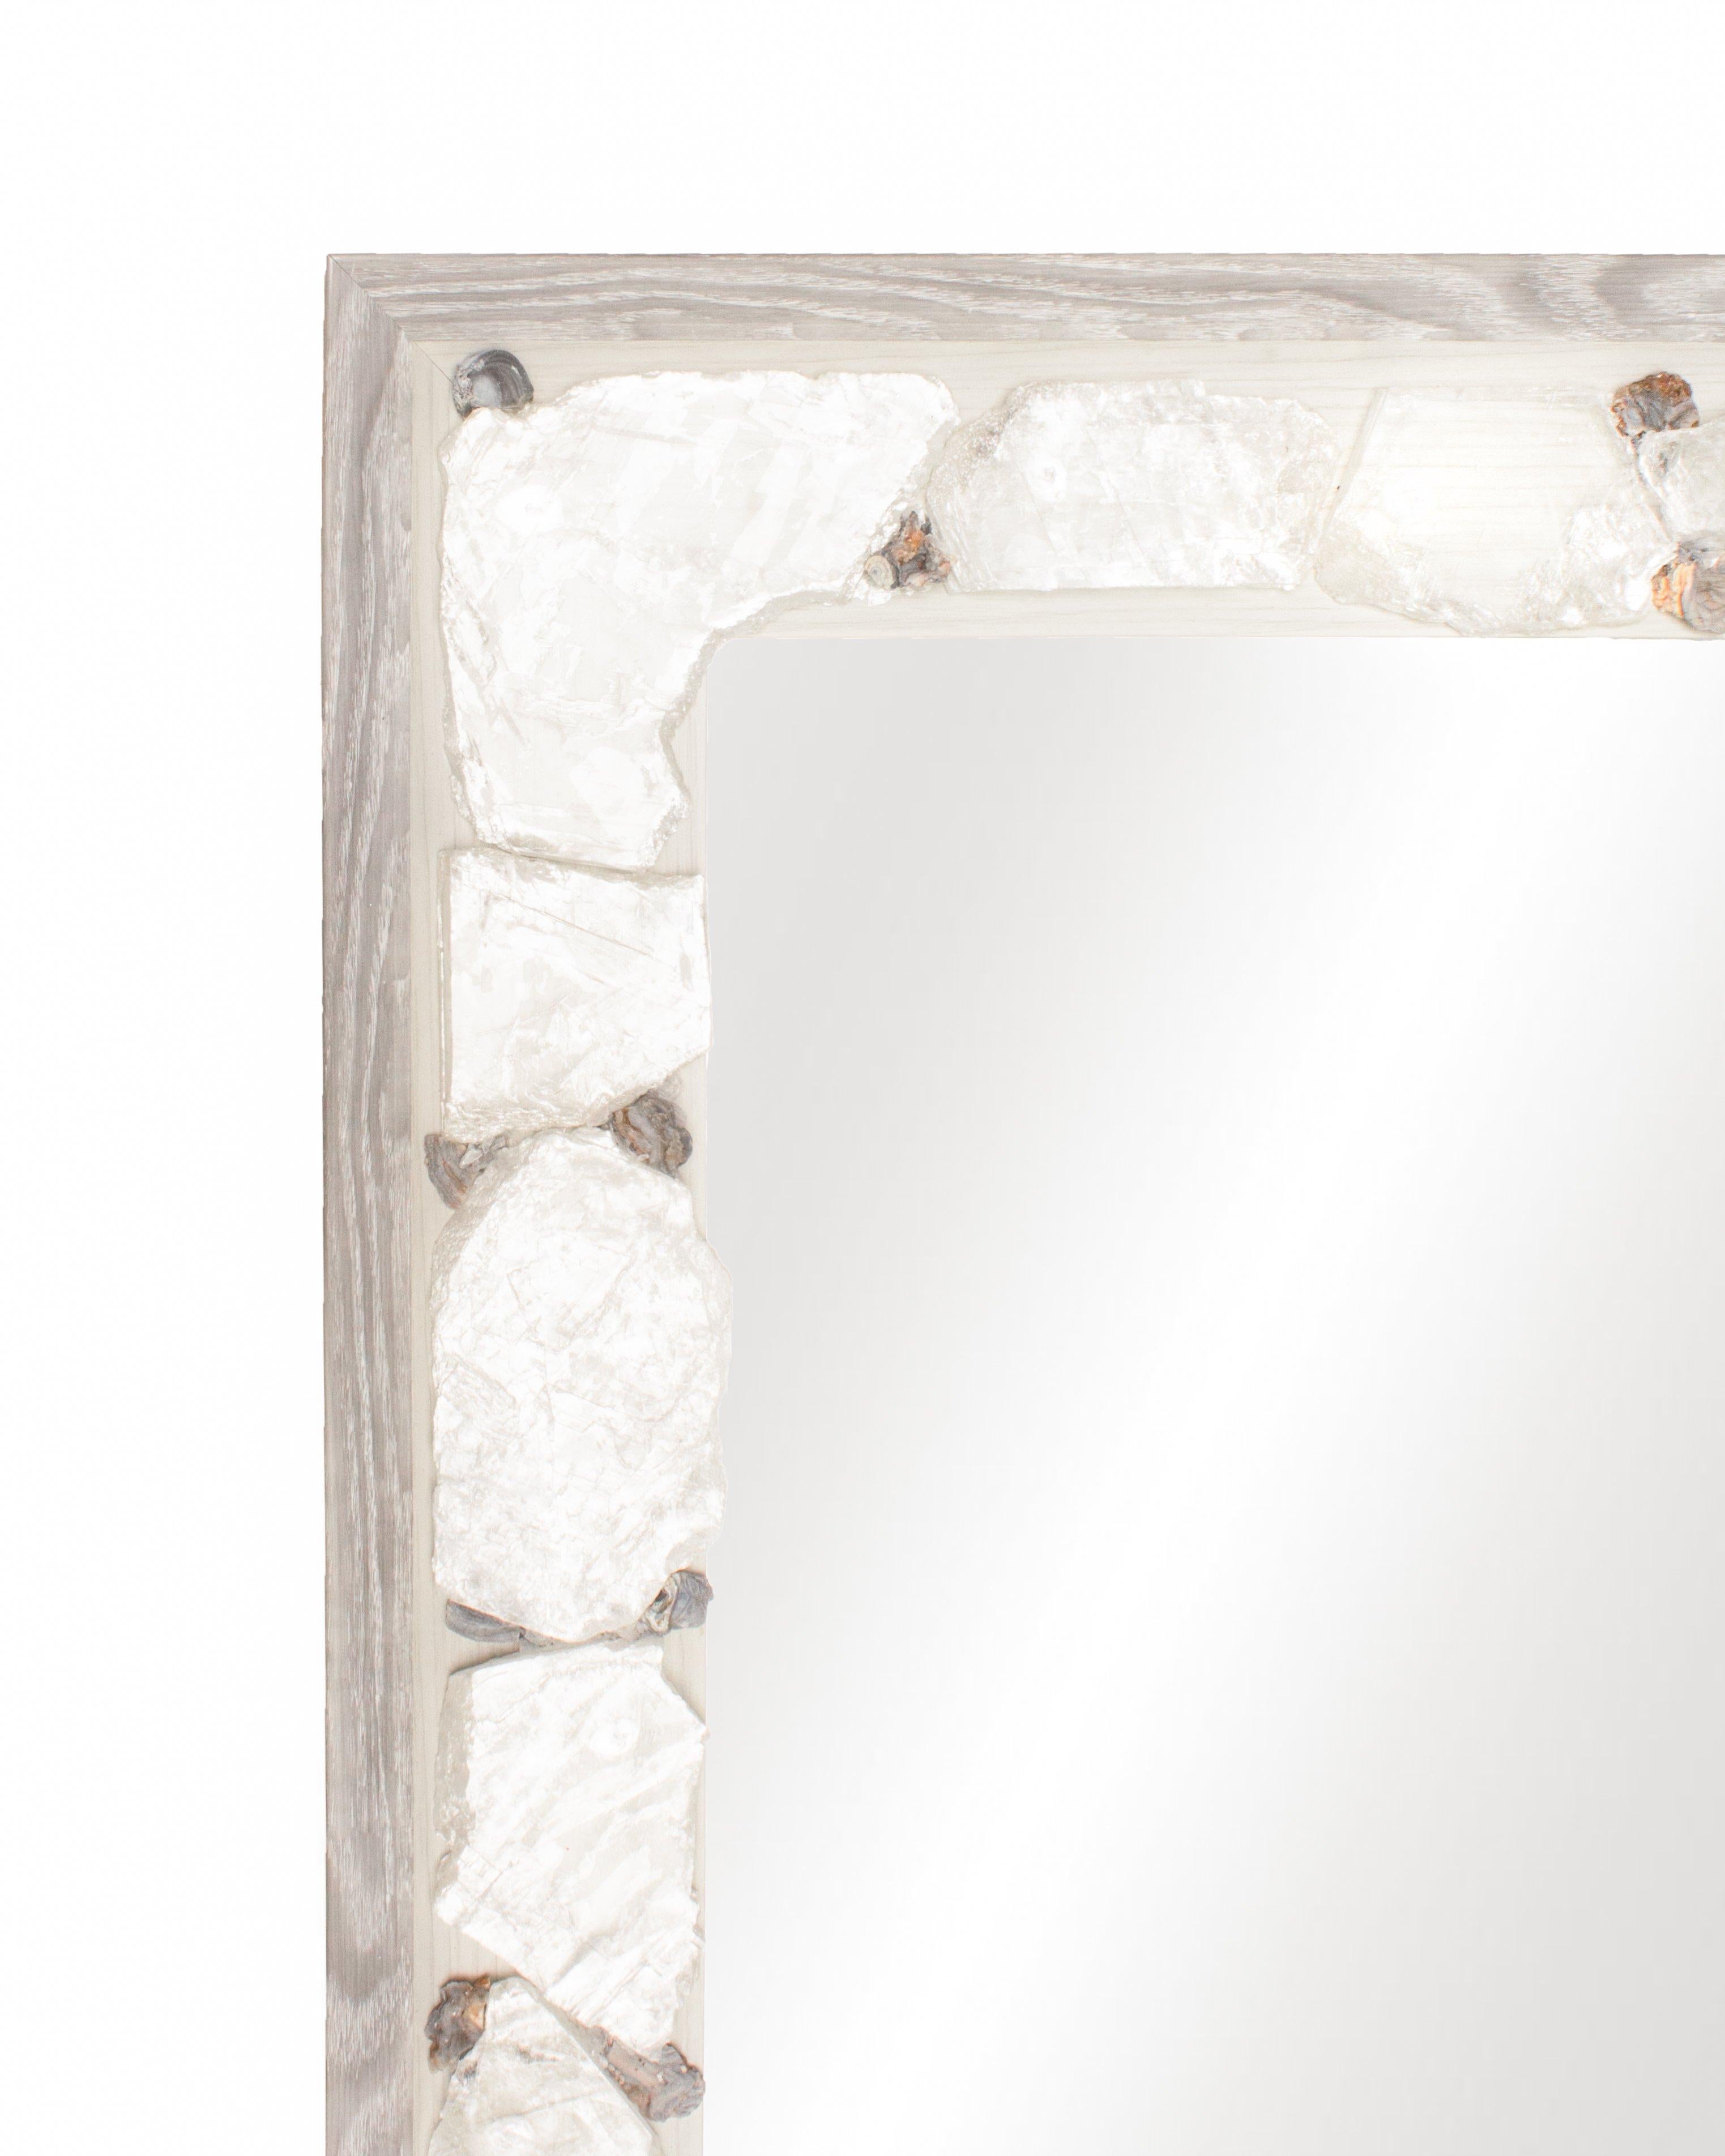 Grey and white limed mirror with selenite slices and chalcedony rosettes.

Selenite is a crystallized form of Gypsum. It is comprised of striations which look like optical light fibers. Although selenite comes in many forms, selenite slices have a